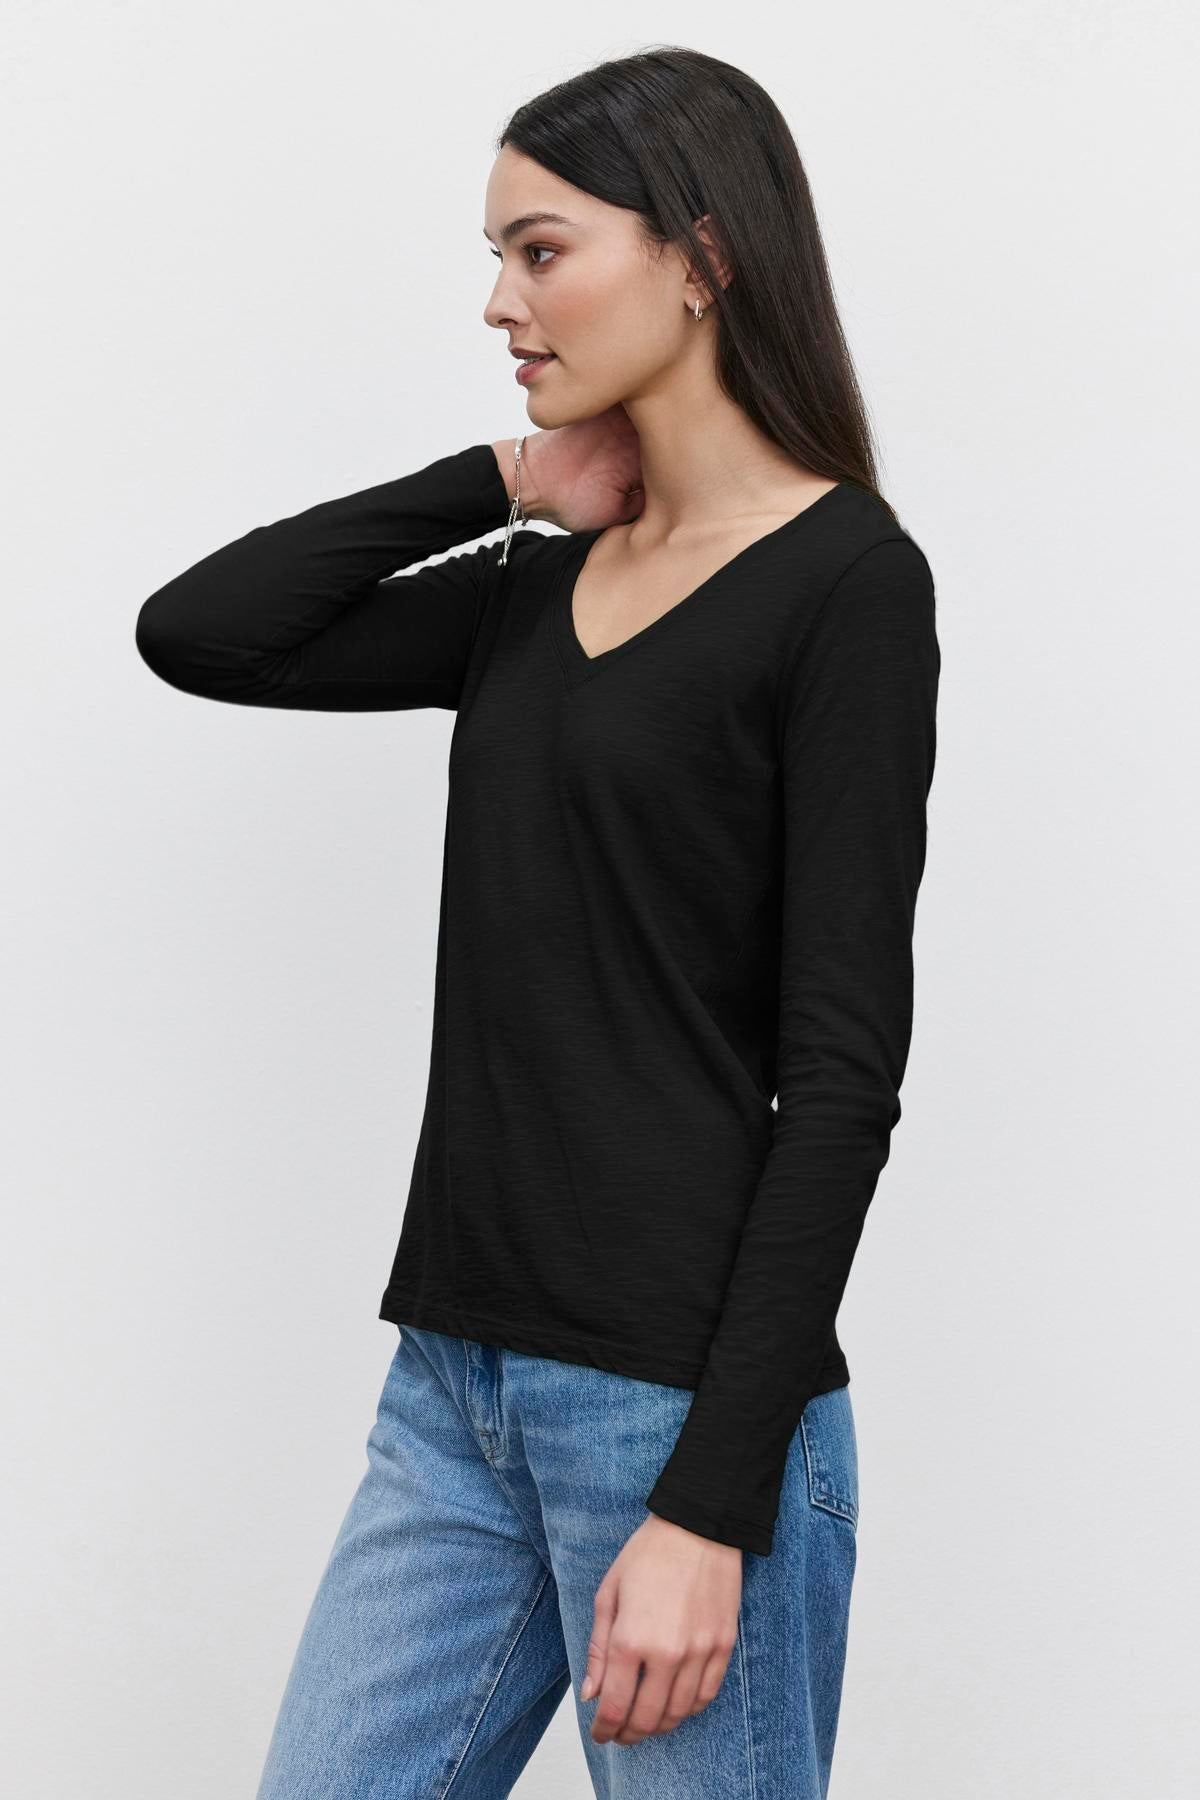 A woman with straight long hair is wearing a black V-neck long-sleeve BLAIRE TEE from Velvet by Graham & Spencer and blue jeans. She is standing sideways and looking to her right against a plain white background, epitomizing everyday wear.-37377299939521